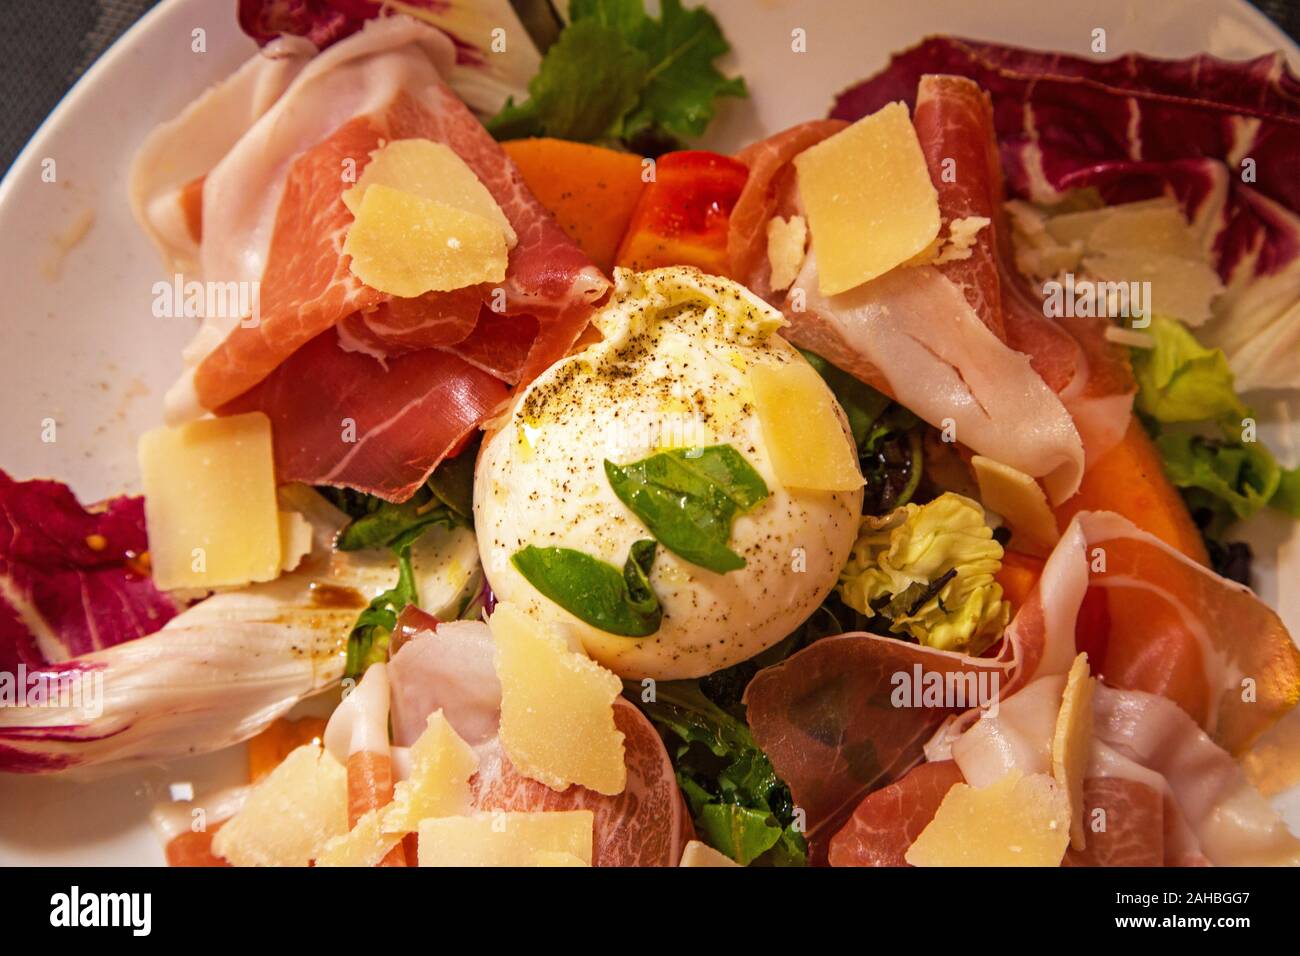 A plate of traditional meats and cheeses served in southern France Stock Photo